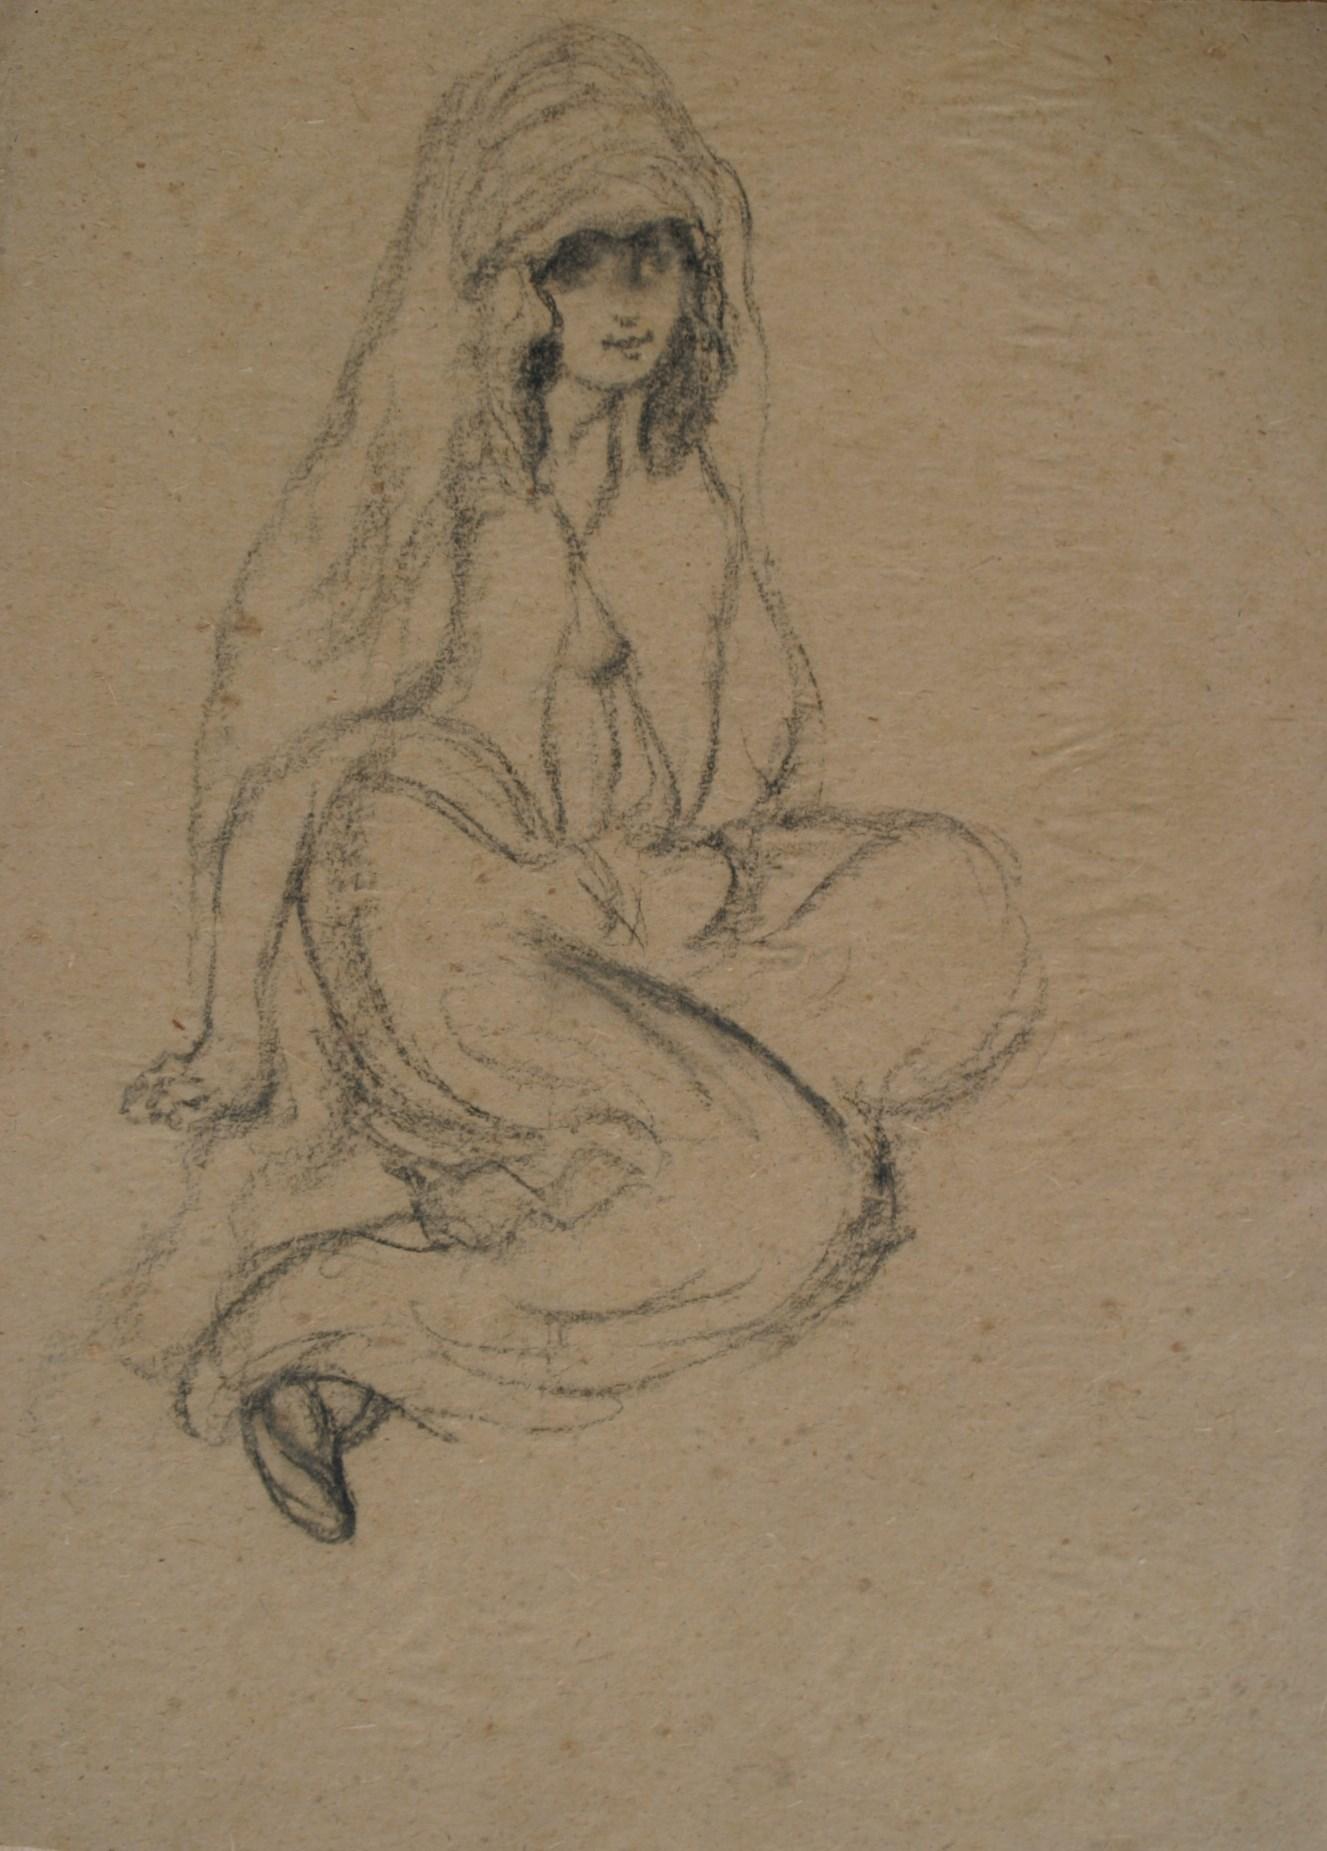 SOLD UNFRAMED 

Oriental Woman by Georges Manzana Pissarro (1871-1961)
Charcoal on paper
48 x 32 cm (18 ⅞ x 12 ⅝ inches)

This work is accompanied by a certificate of authenticity from Lélia Pissarro.

Artist biography
Like all second-generation